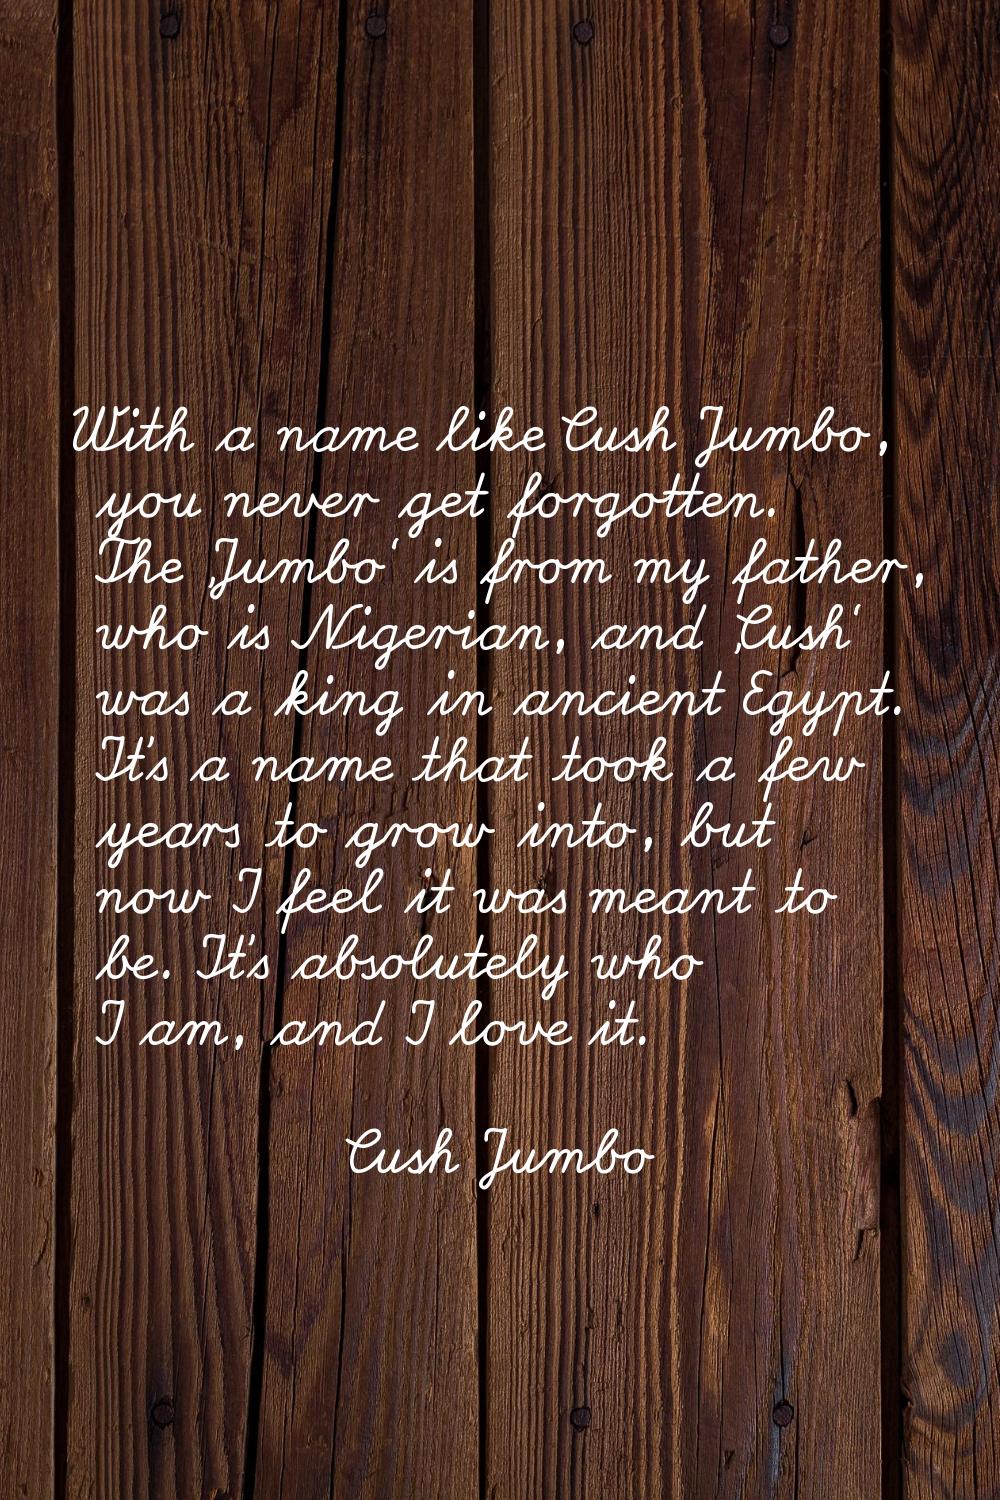 With a name like Cush Jumbo, you never get forgotten. The 'Jumbo' is from my father, who is Nigeria